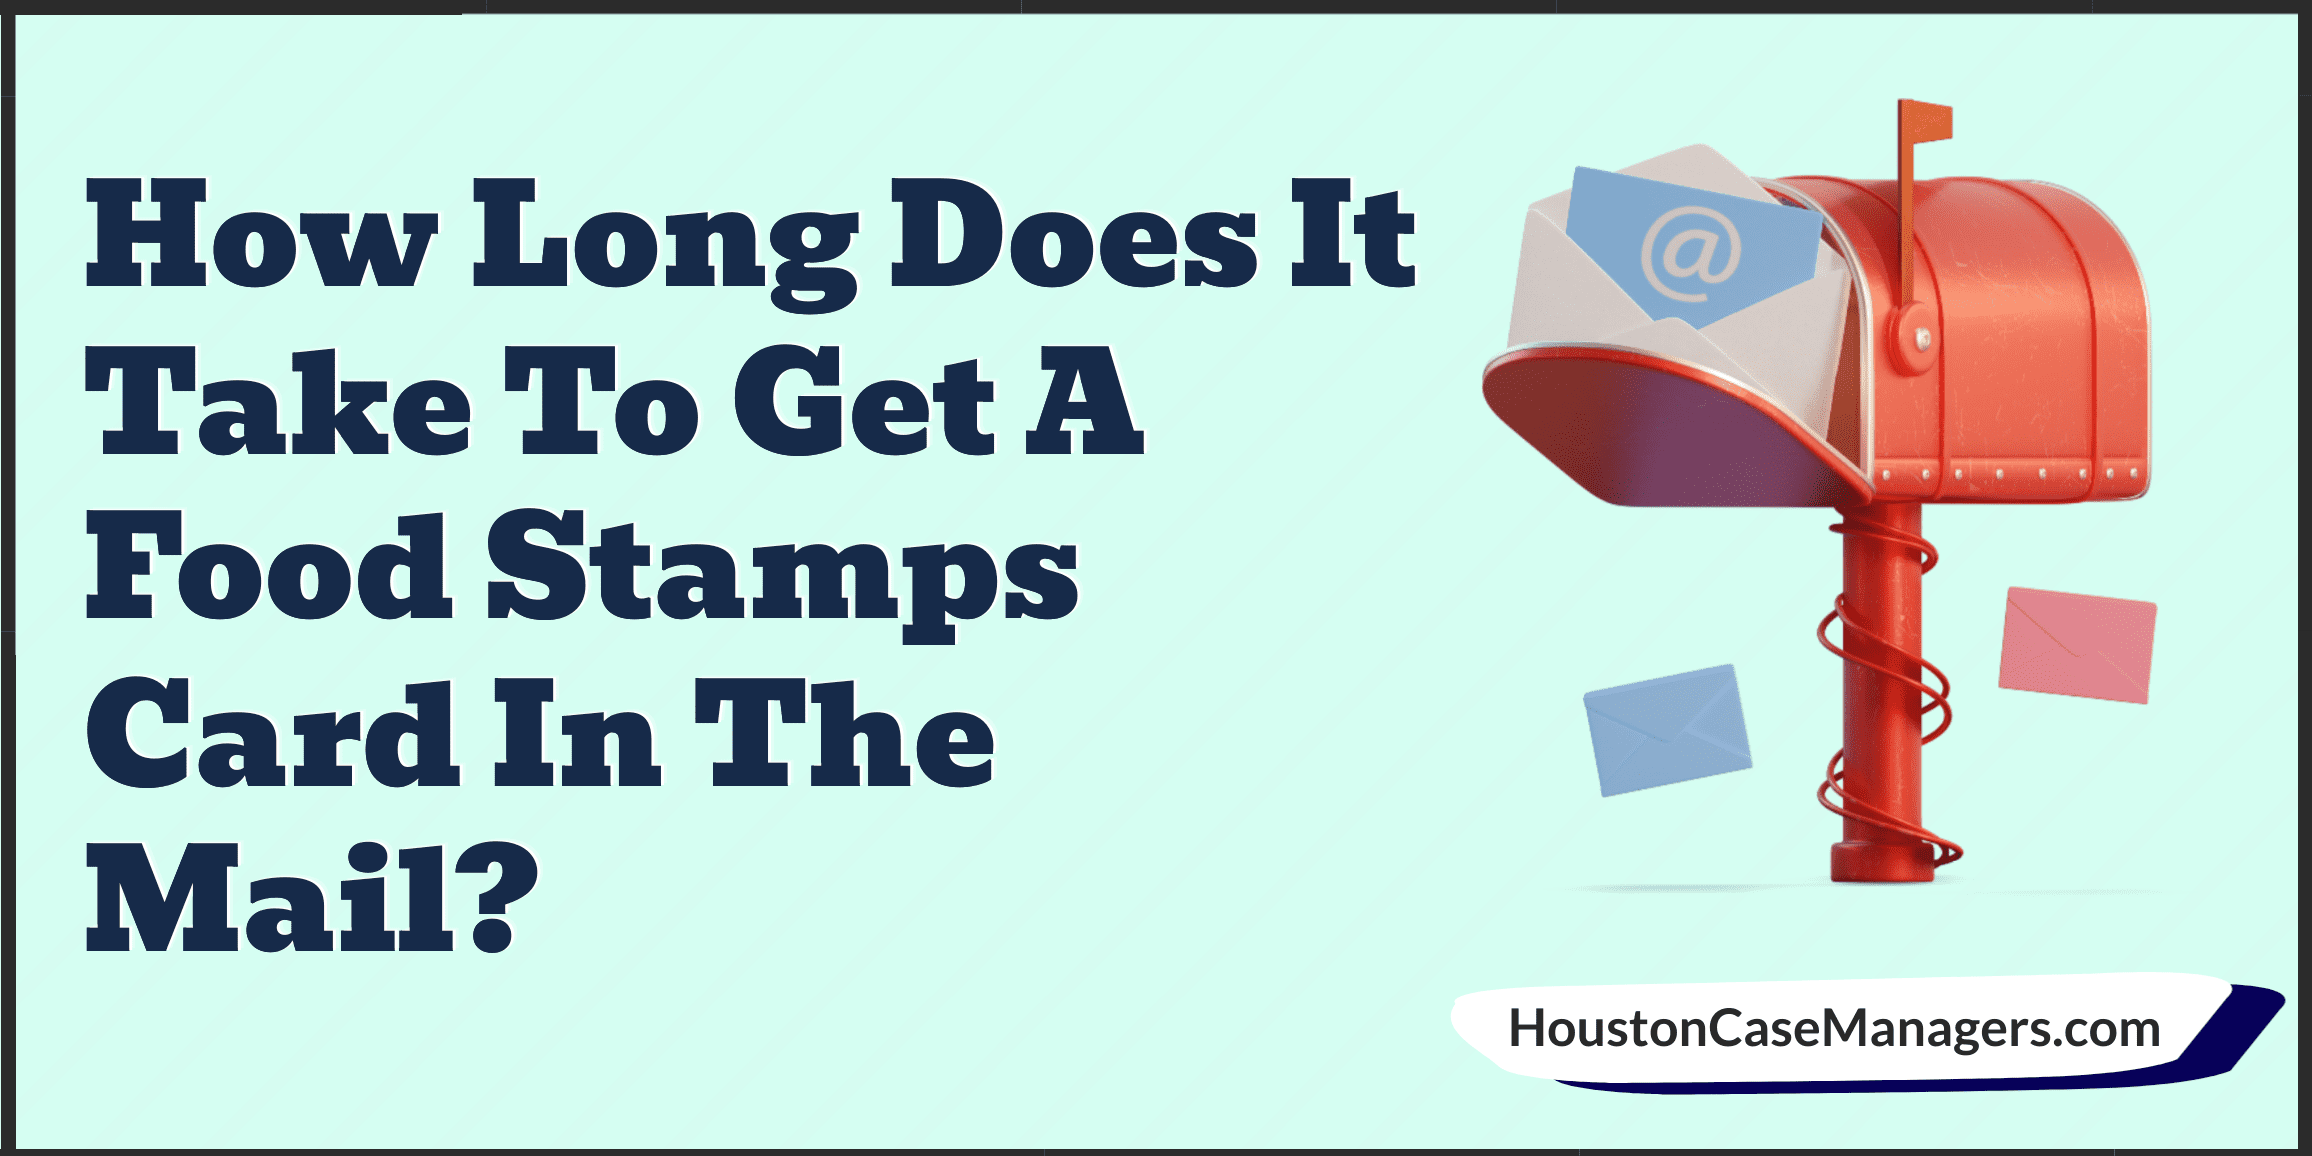 How Long Does It Take To Get A Food Stamps Card In The Mail?